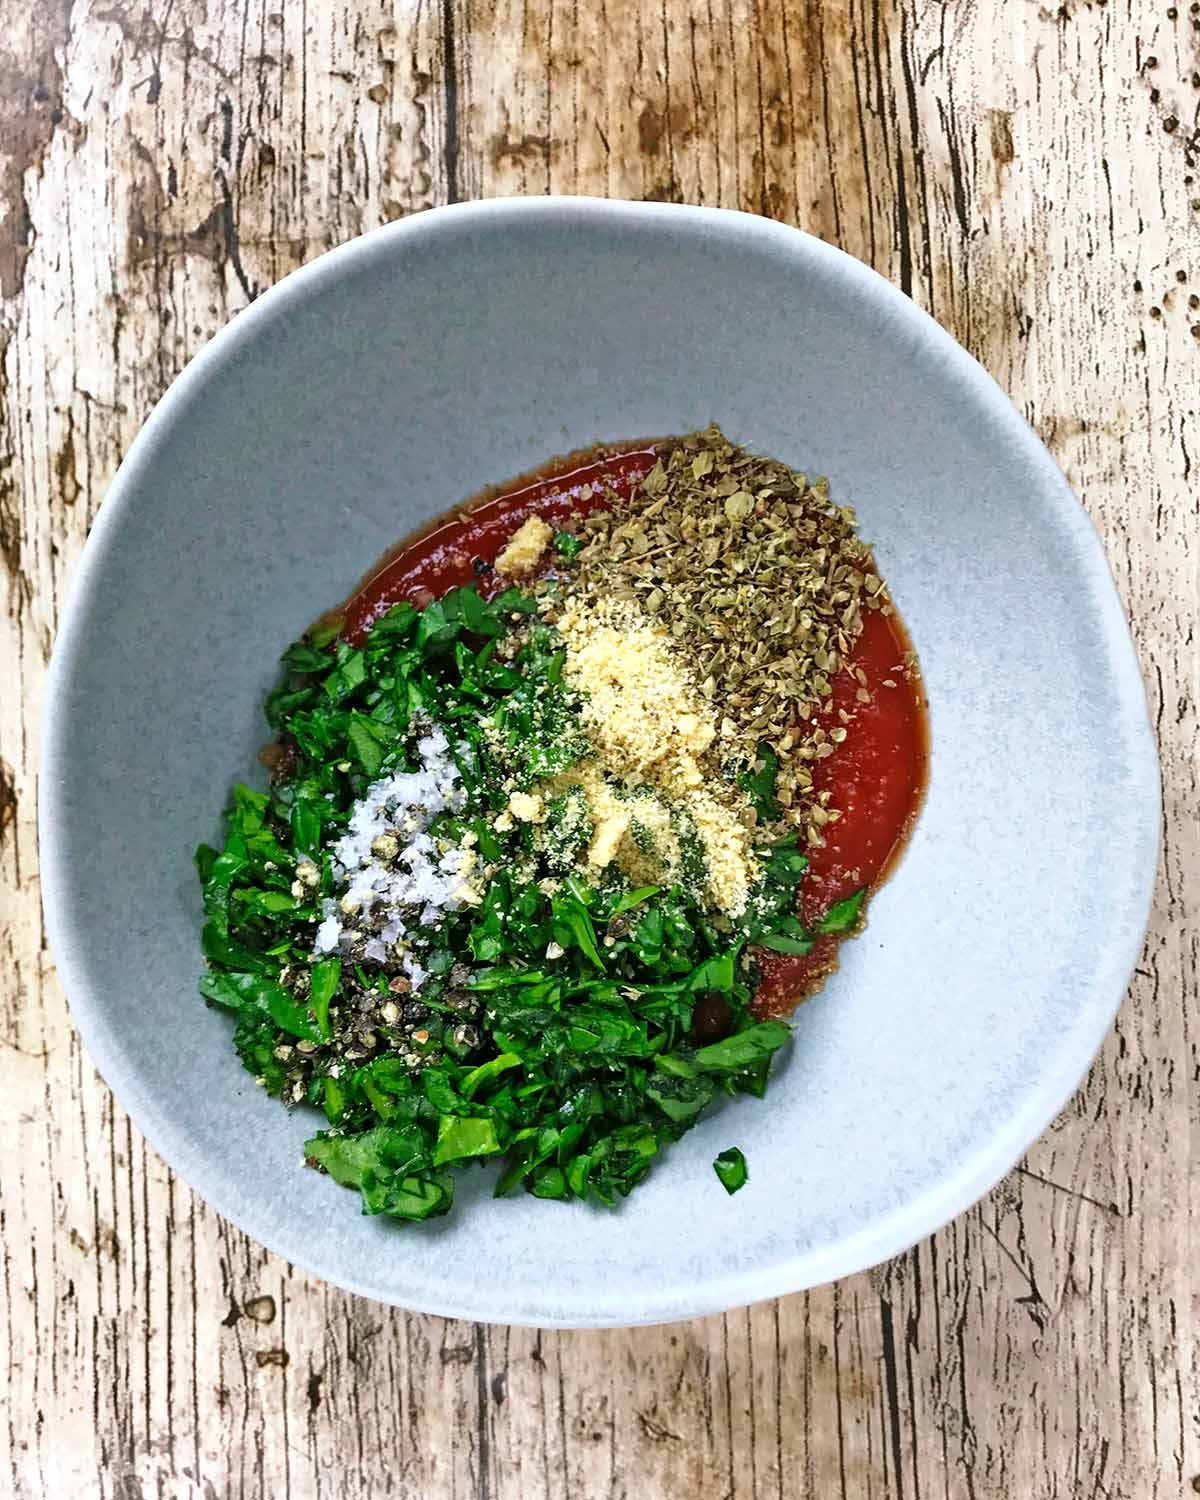 A small bowl containing passata, chopped spinach and dried herbs.